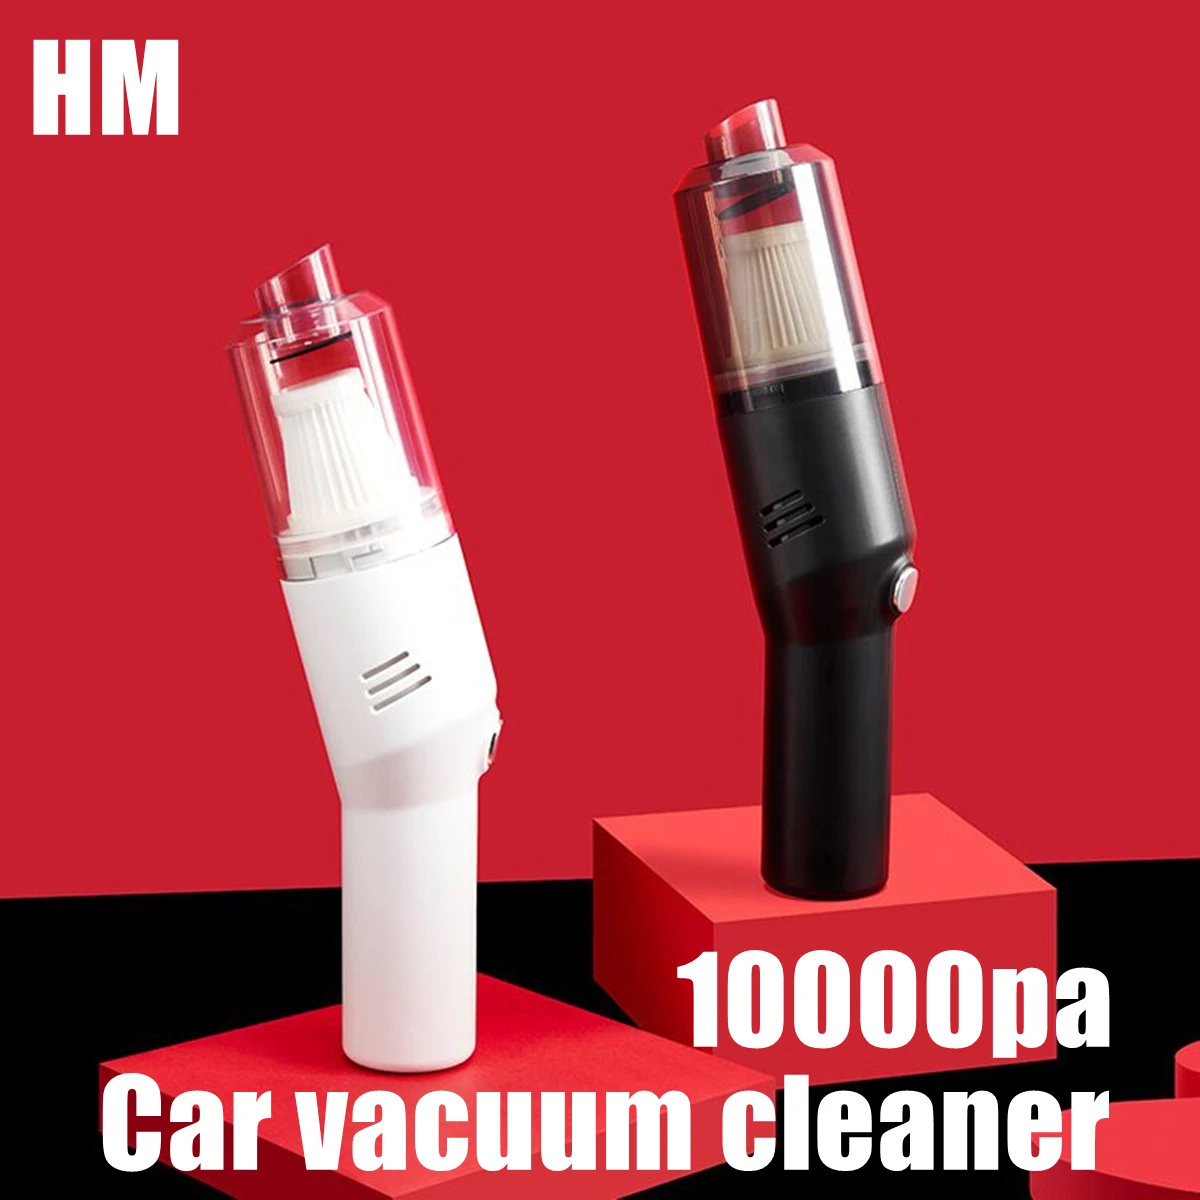 

HM Car Vacuum Cleaner Portable Handheld Home Powerful Cyclone Wet Dry Wireless 120W Use USB Chargeable Durable Vacuum Cleaner